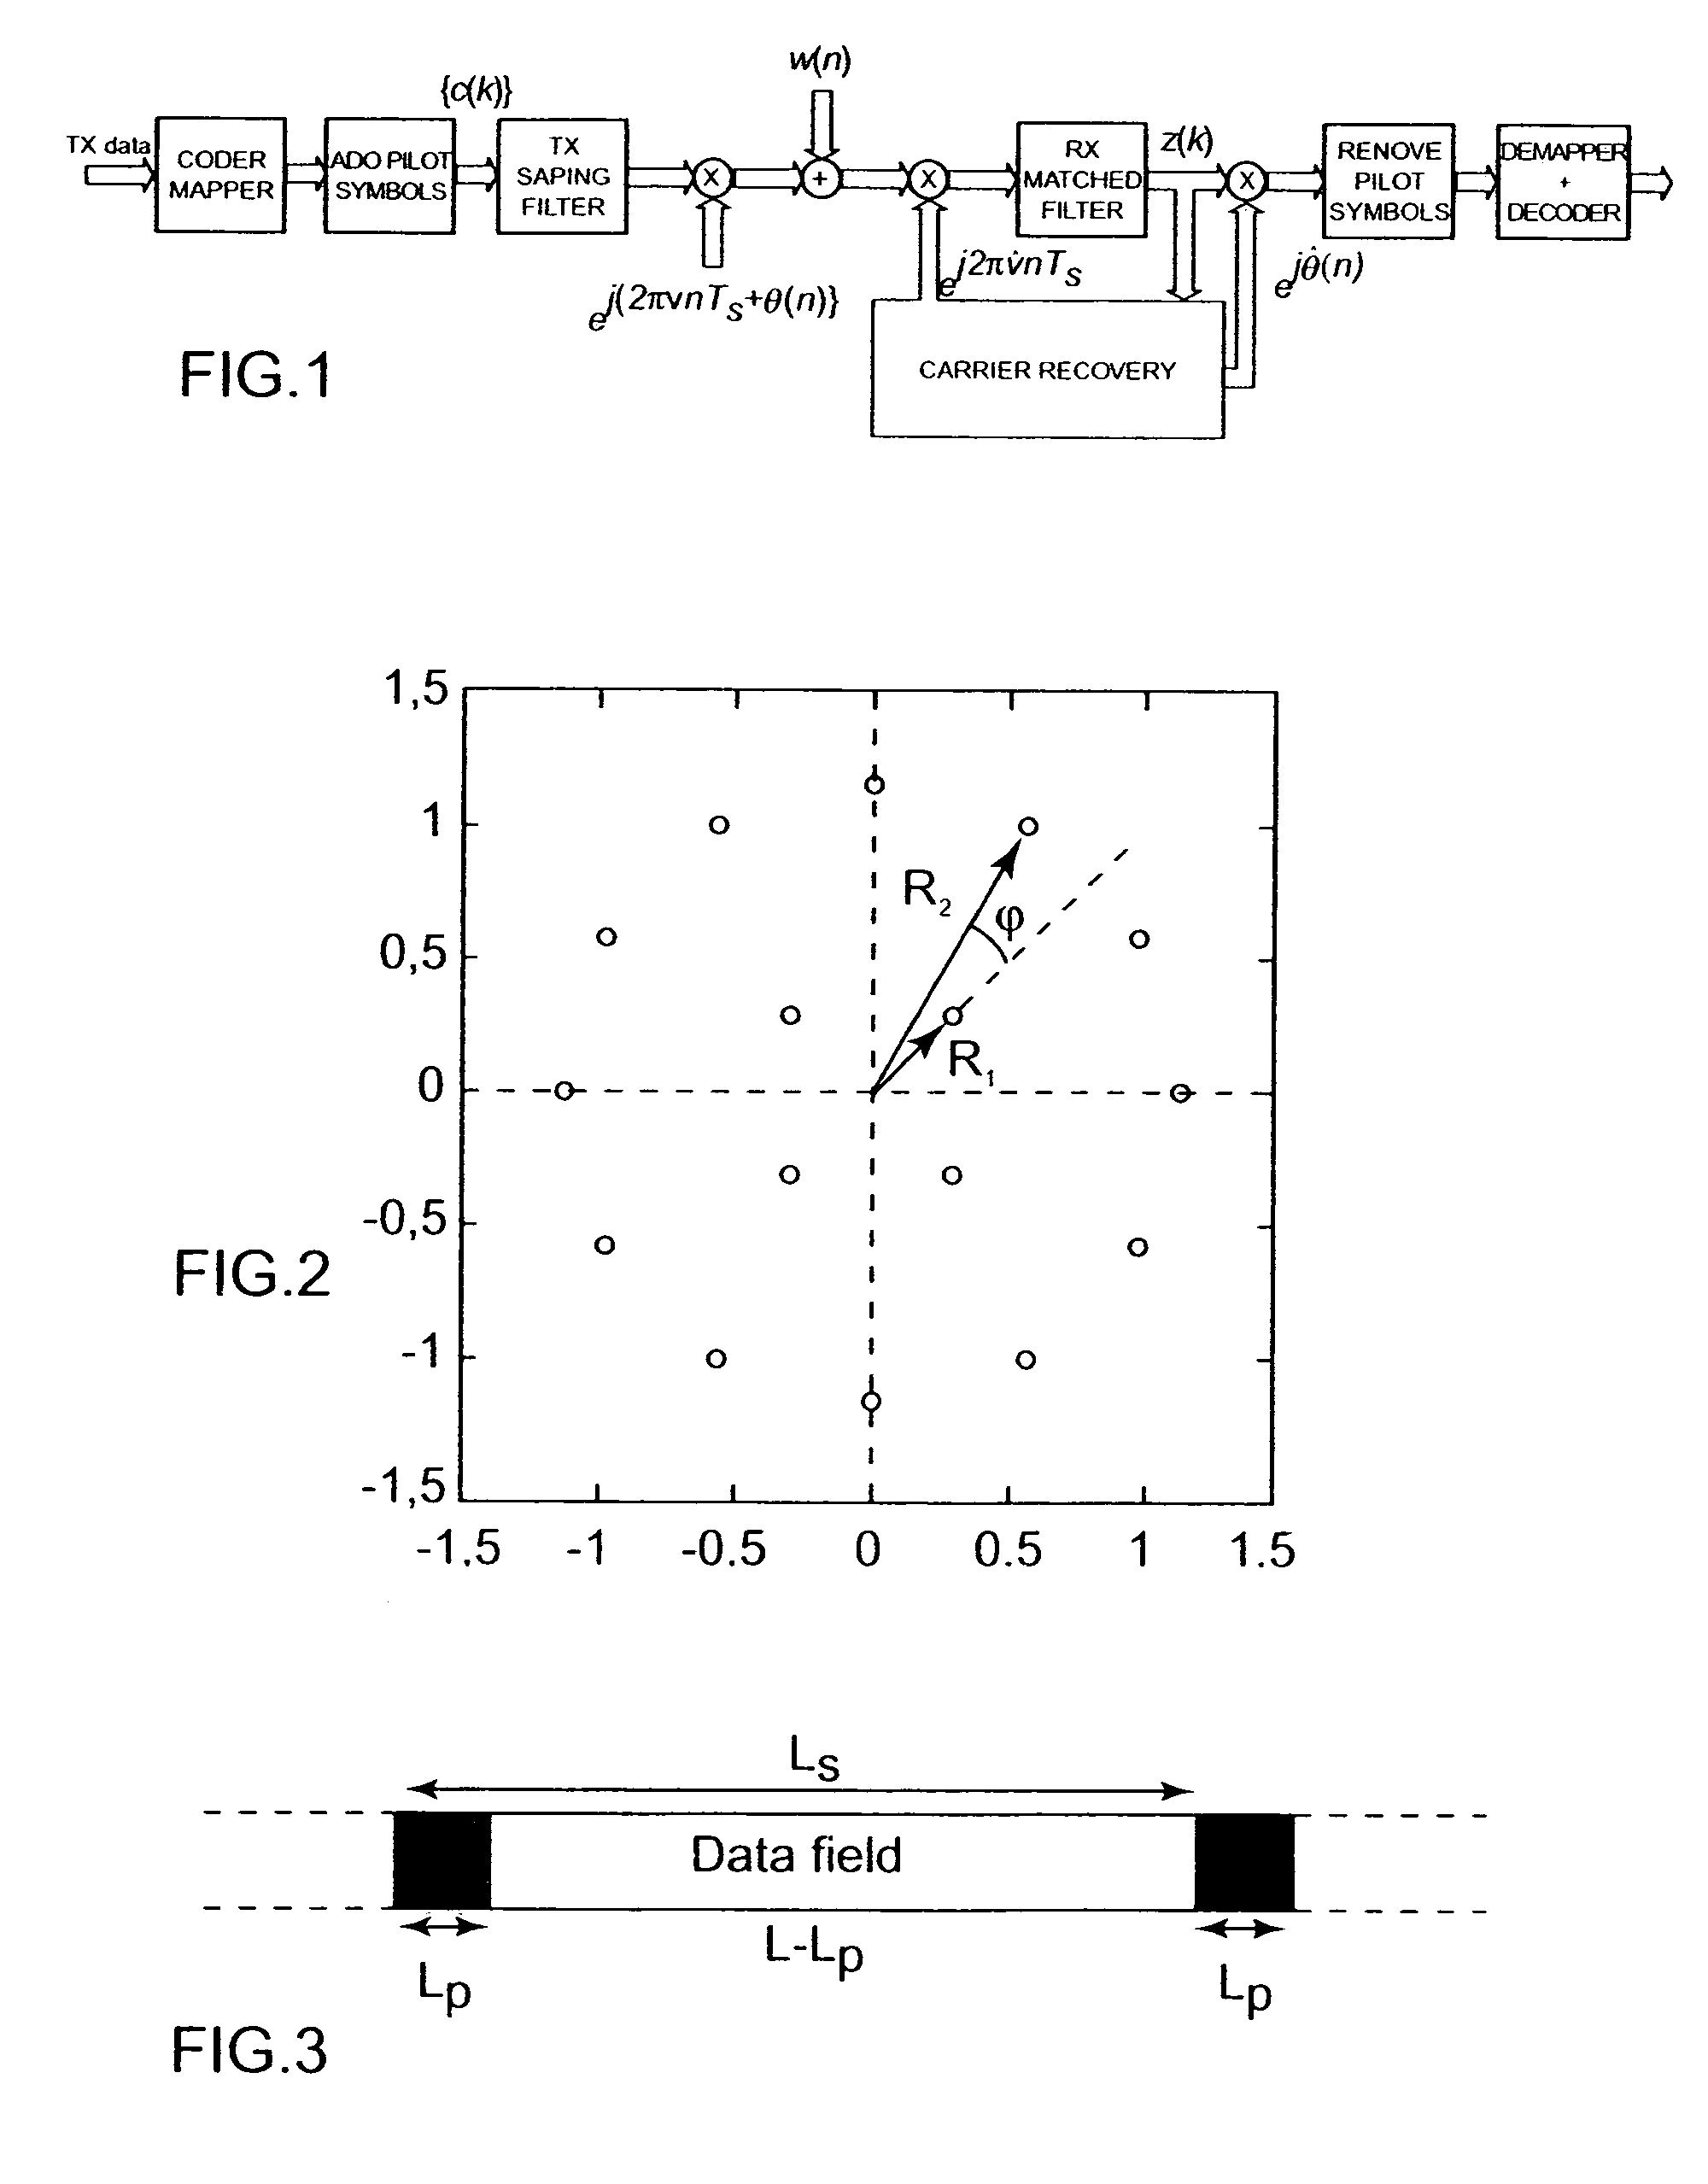 Process for providing a pilot aided phase recovery of a carrier